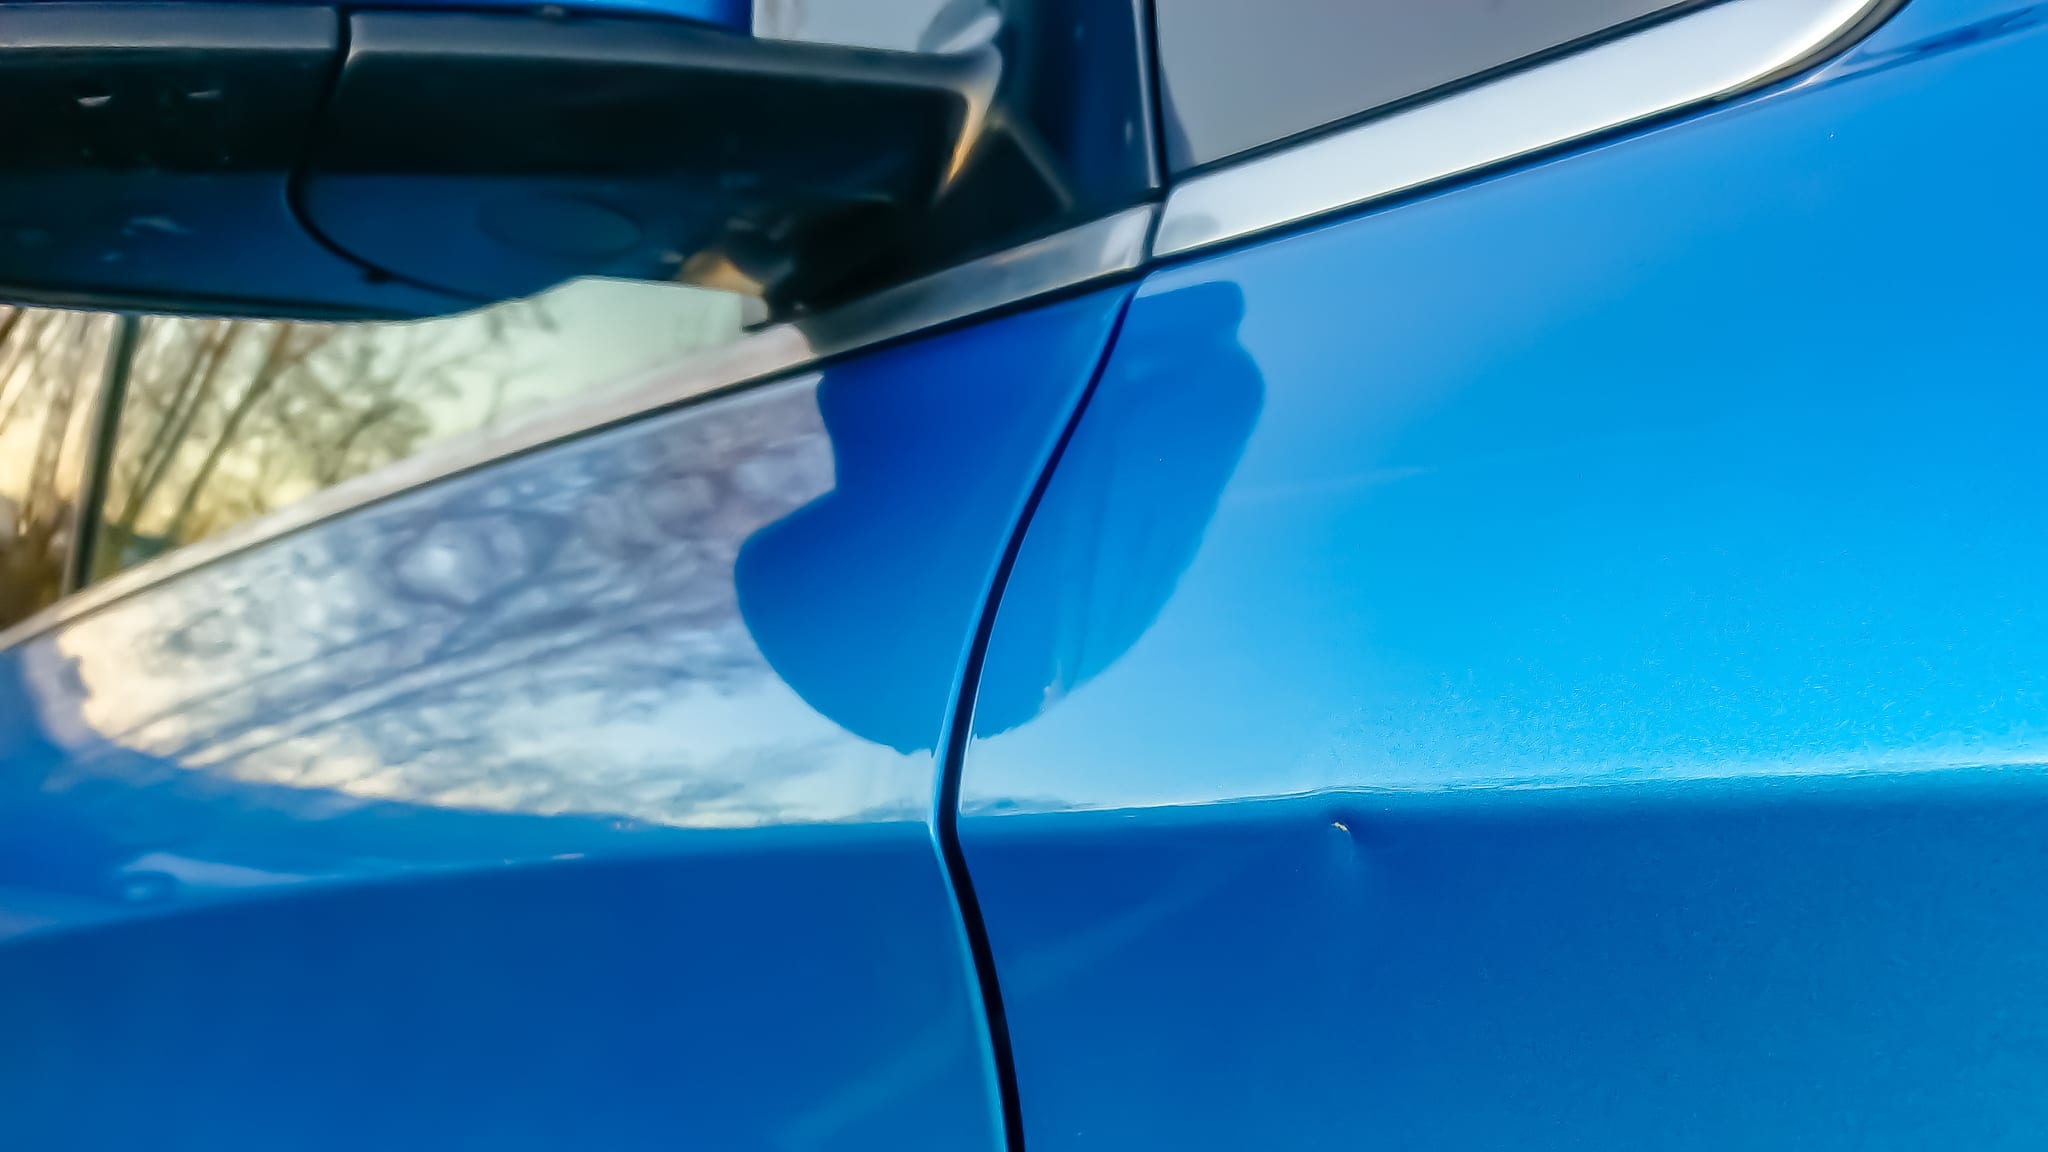 A small dent in the fender of a blue metallic car